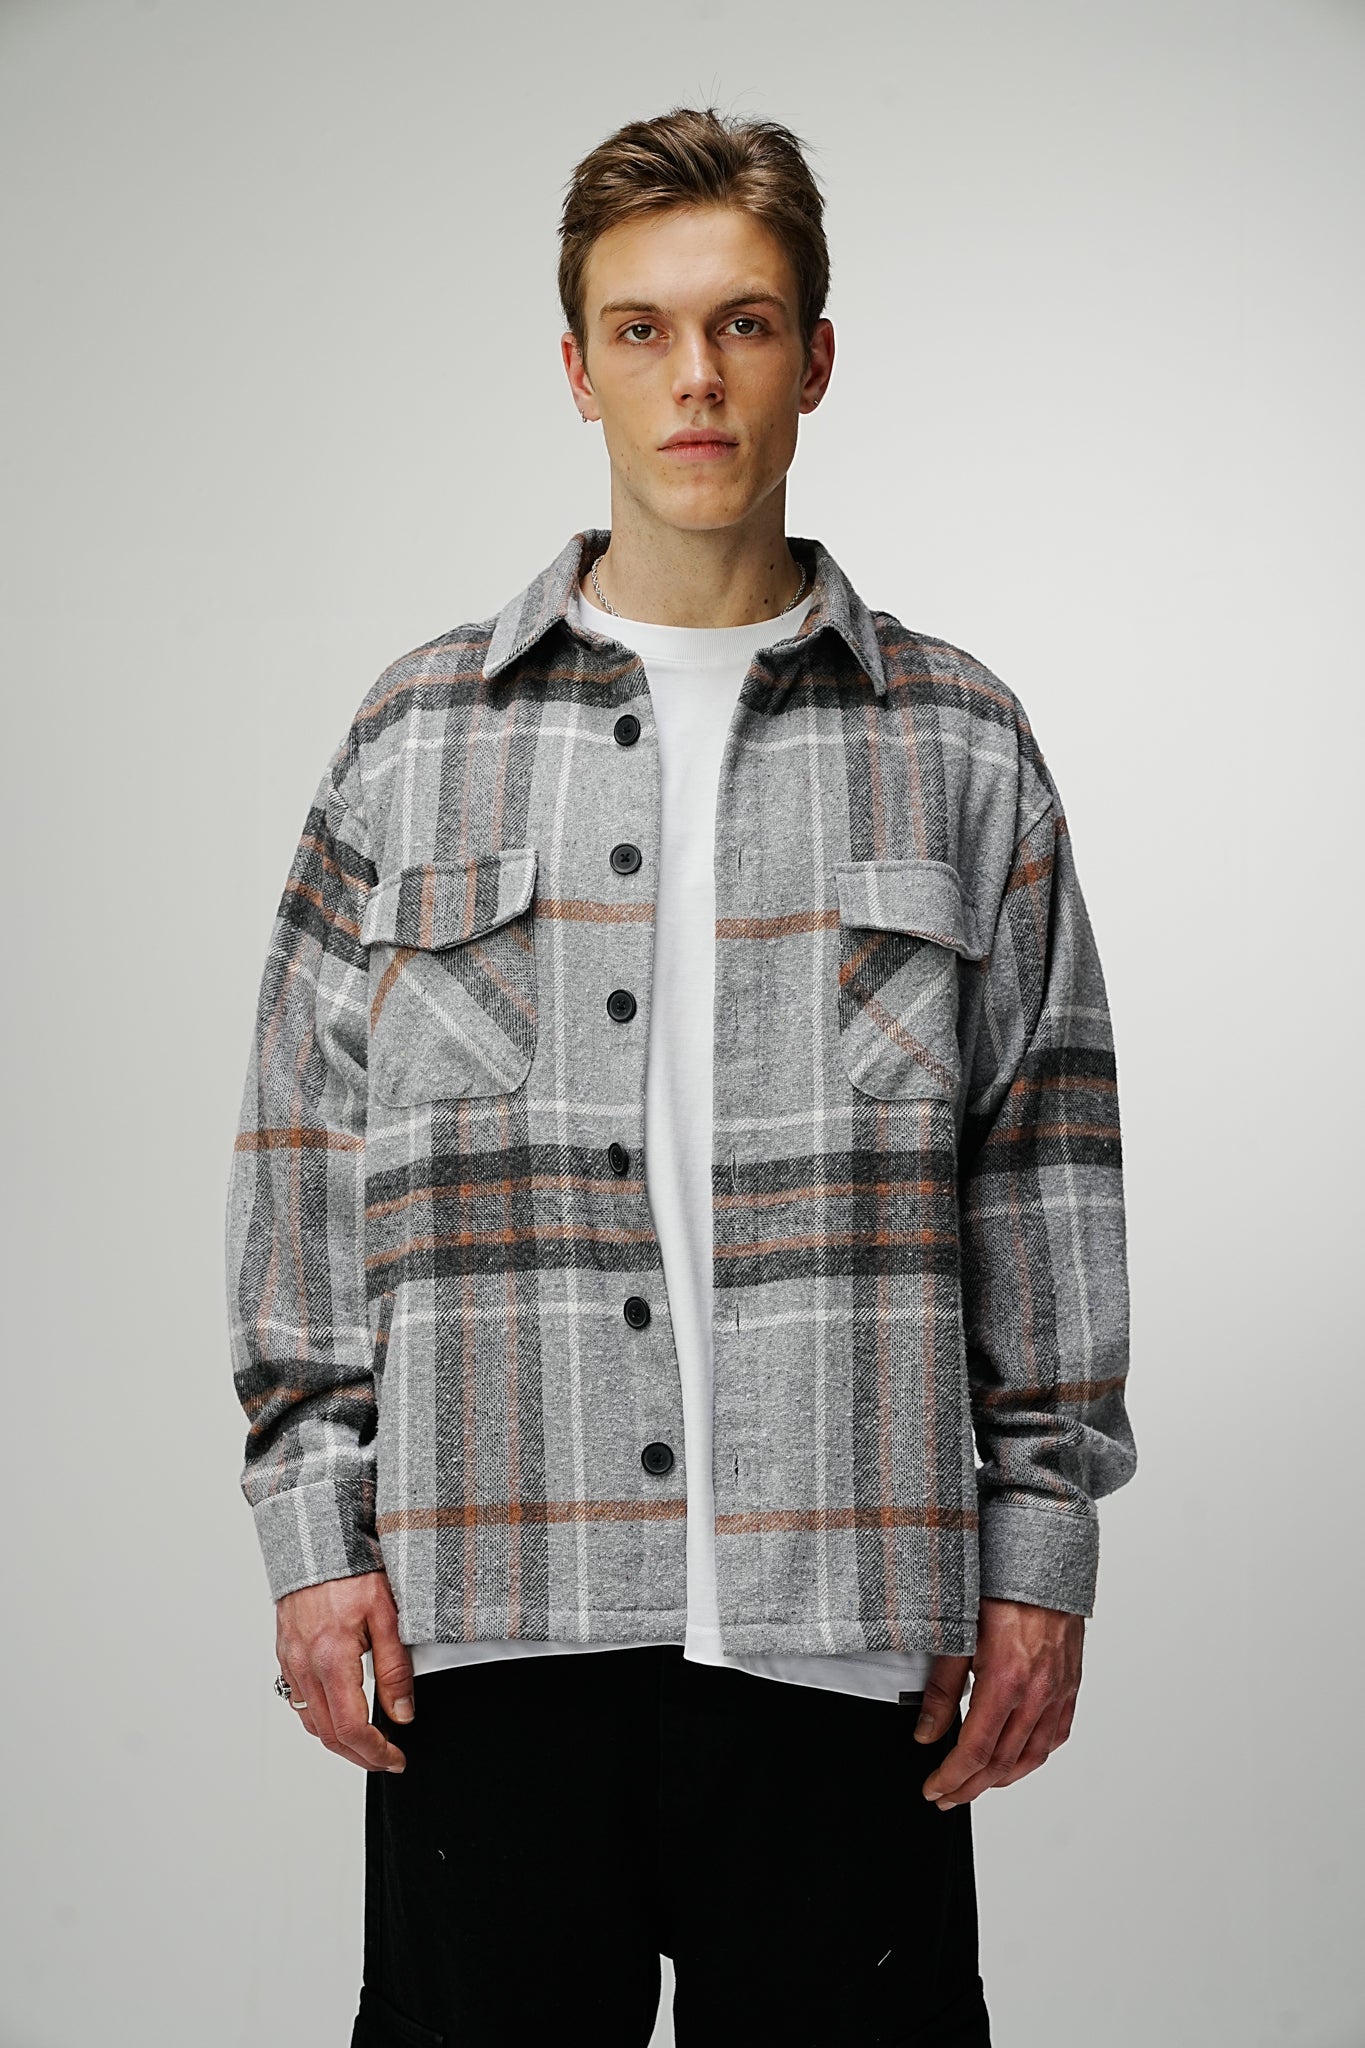 Heavy Oversized Flannel Shirt Grey Parrot - UNEFFECTED STUDIOS® - Shirts & Tops - UNEFFECTED STUDIOS®